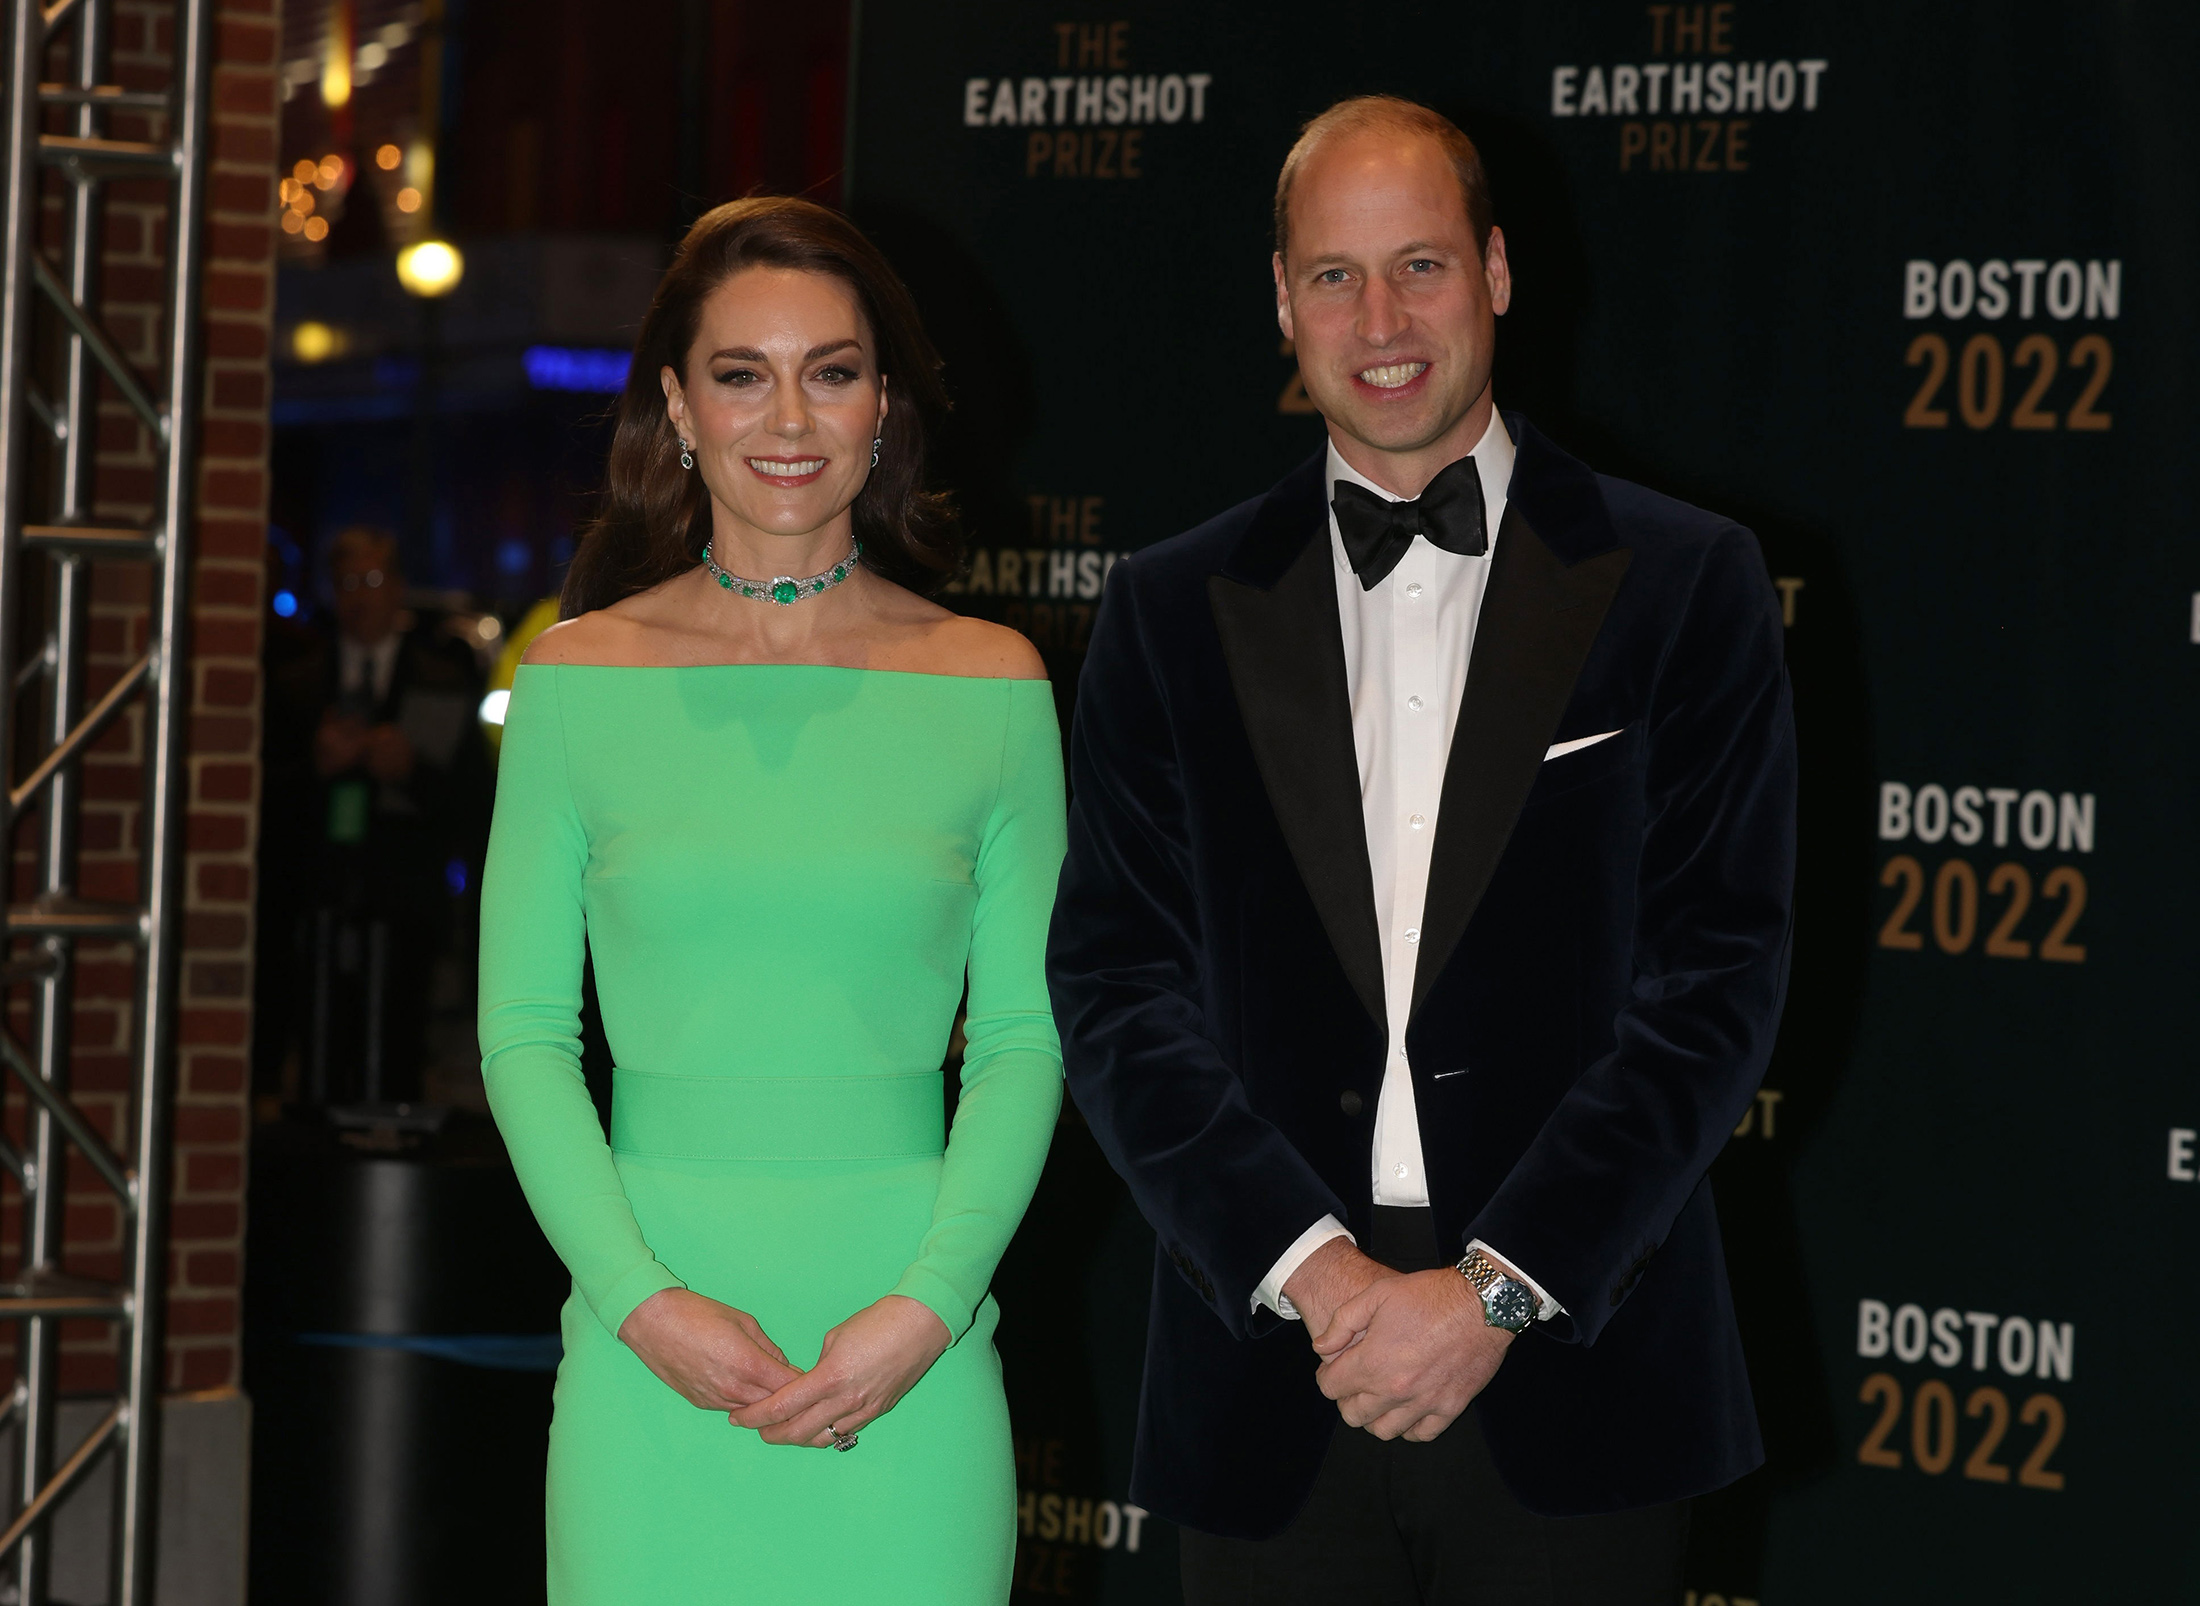 Prince William and&nbsp;Catherine&nbsp;at The Earthshot Prize 2022&nbsp;in Boston, Massachusetts, on Dec. 2.